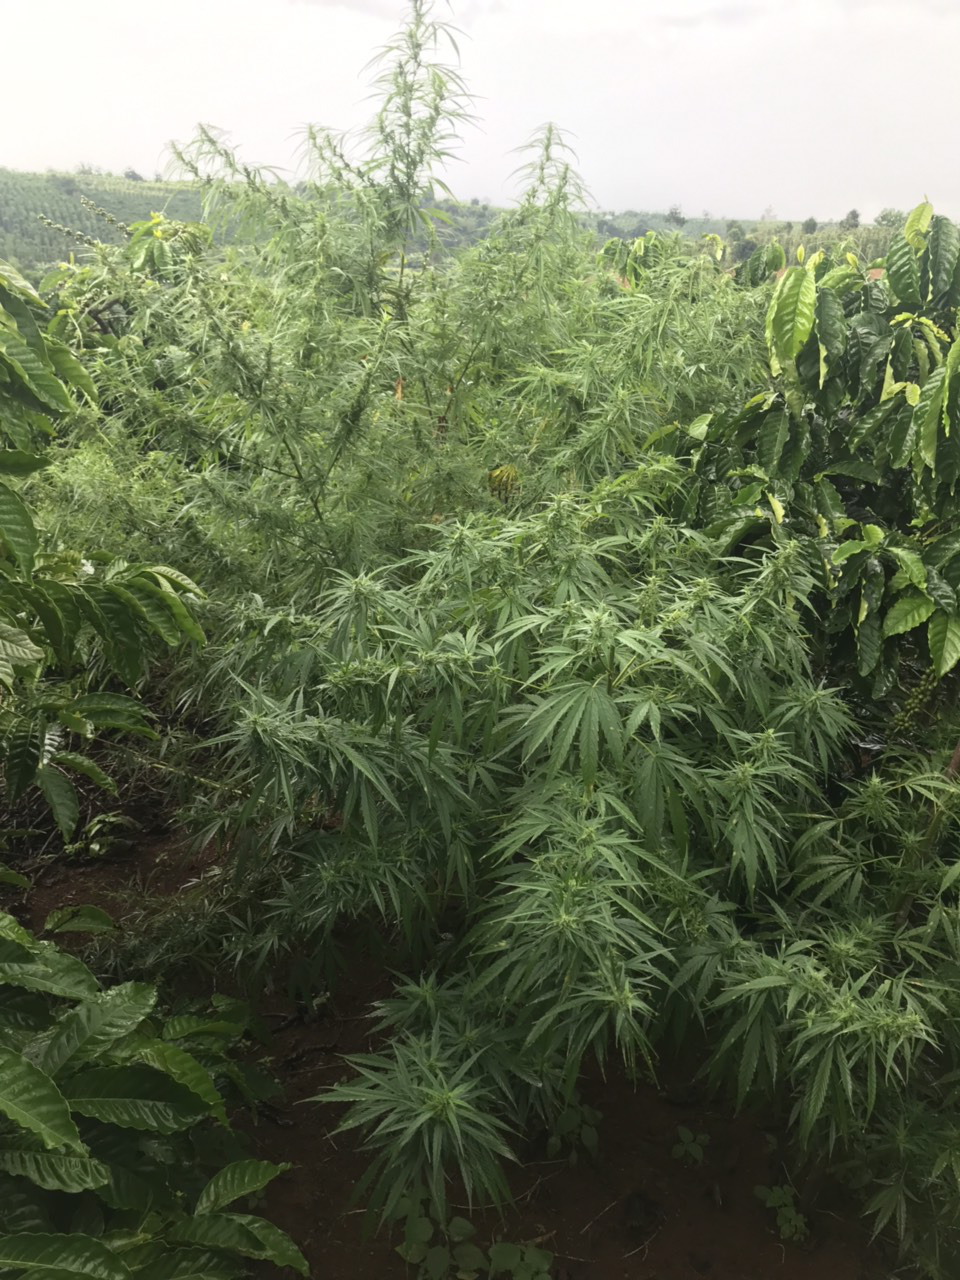 Woman caught growing over 180 cannabis plants in Vietnam’s Central Highlands